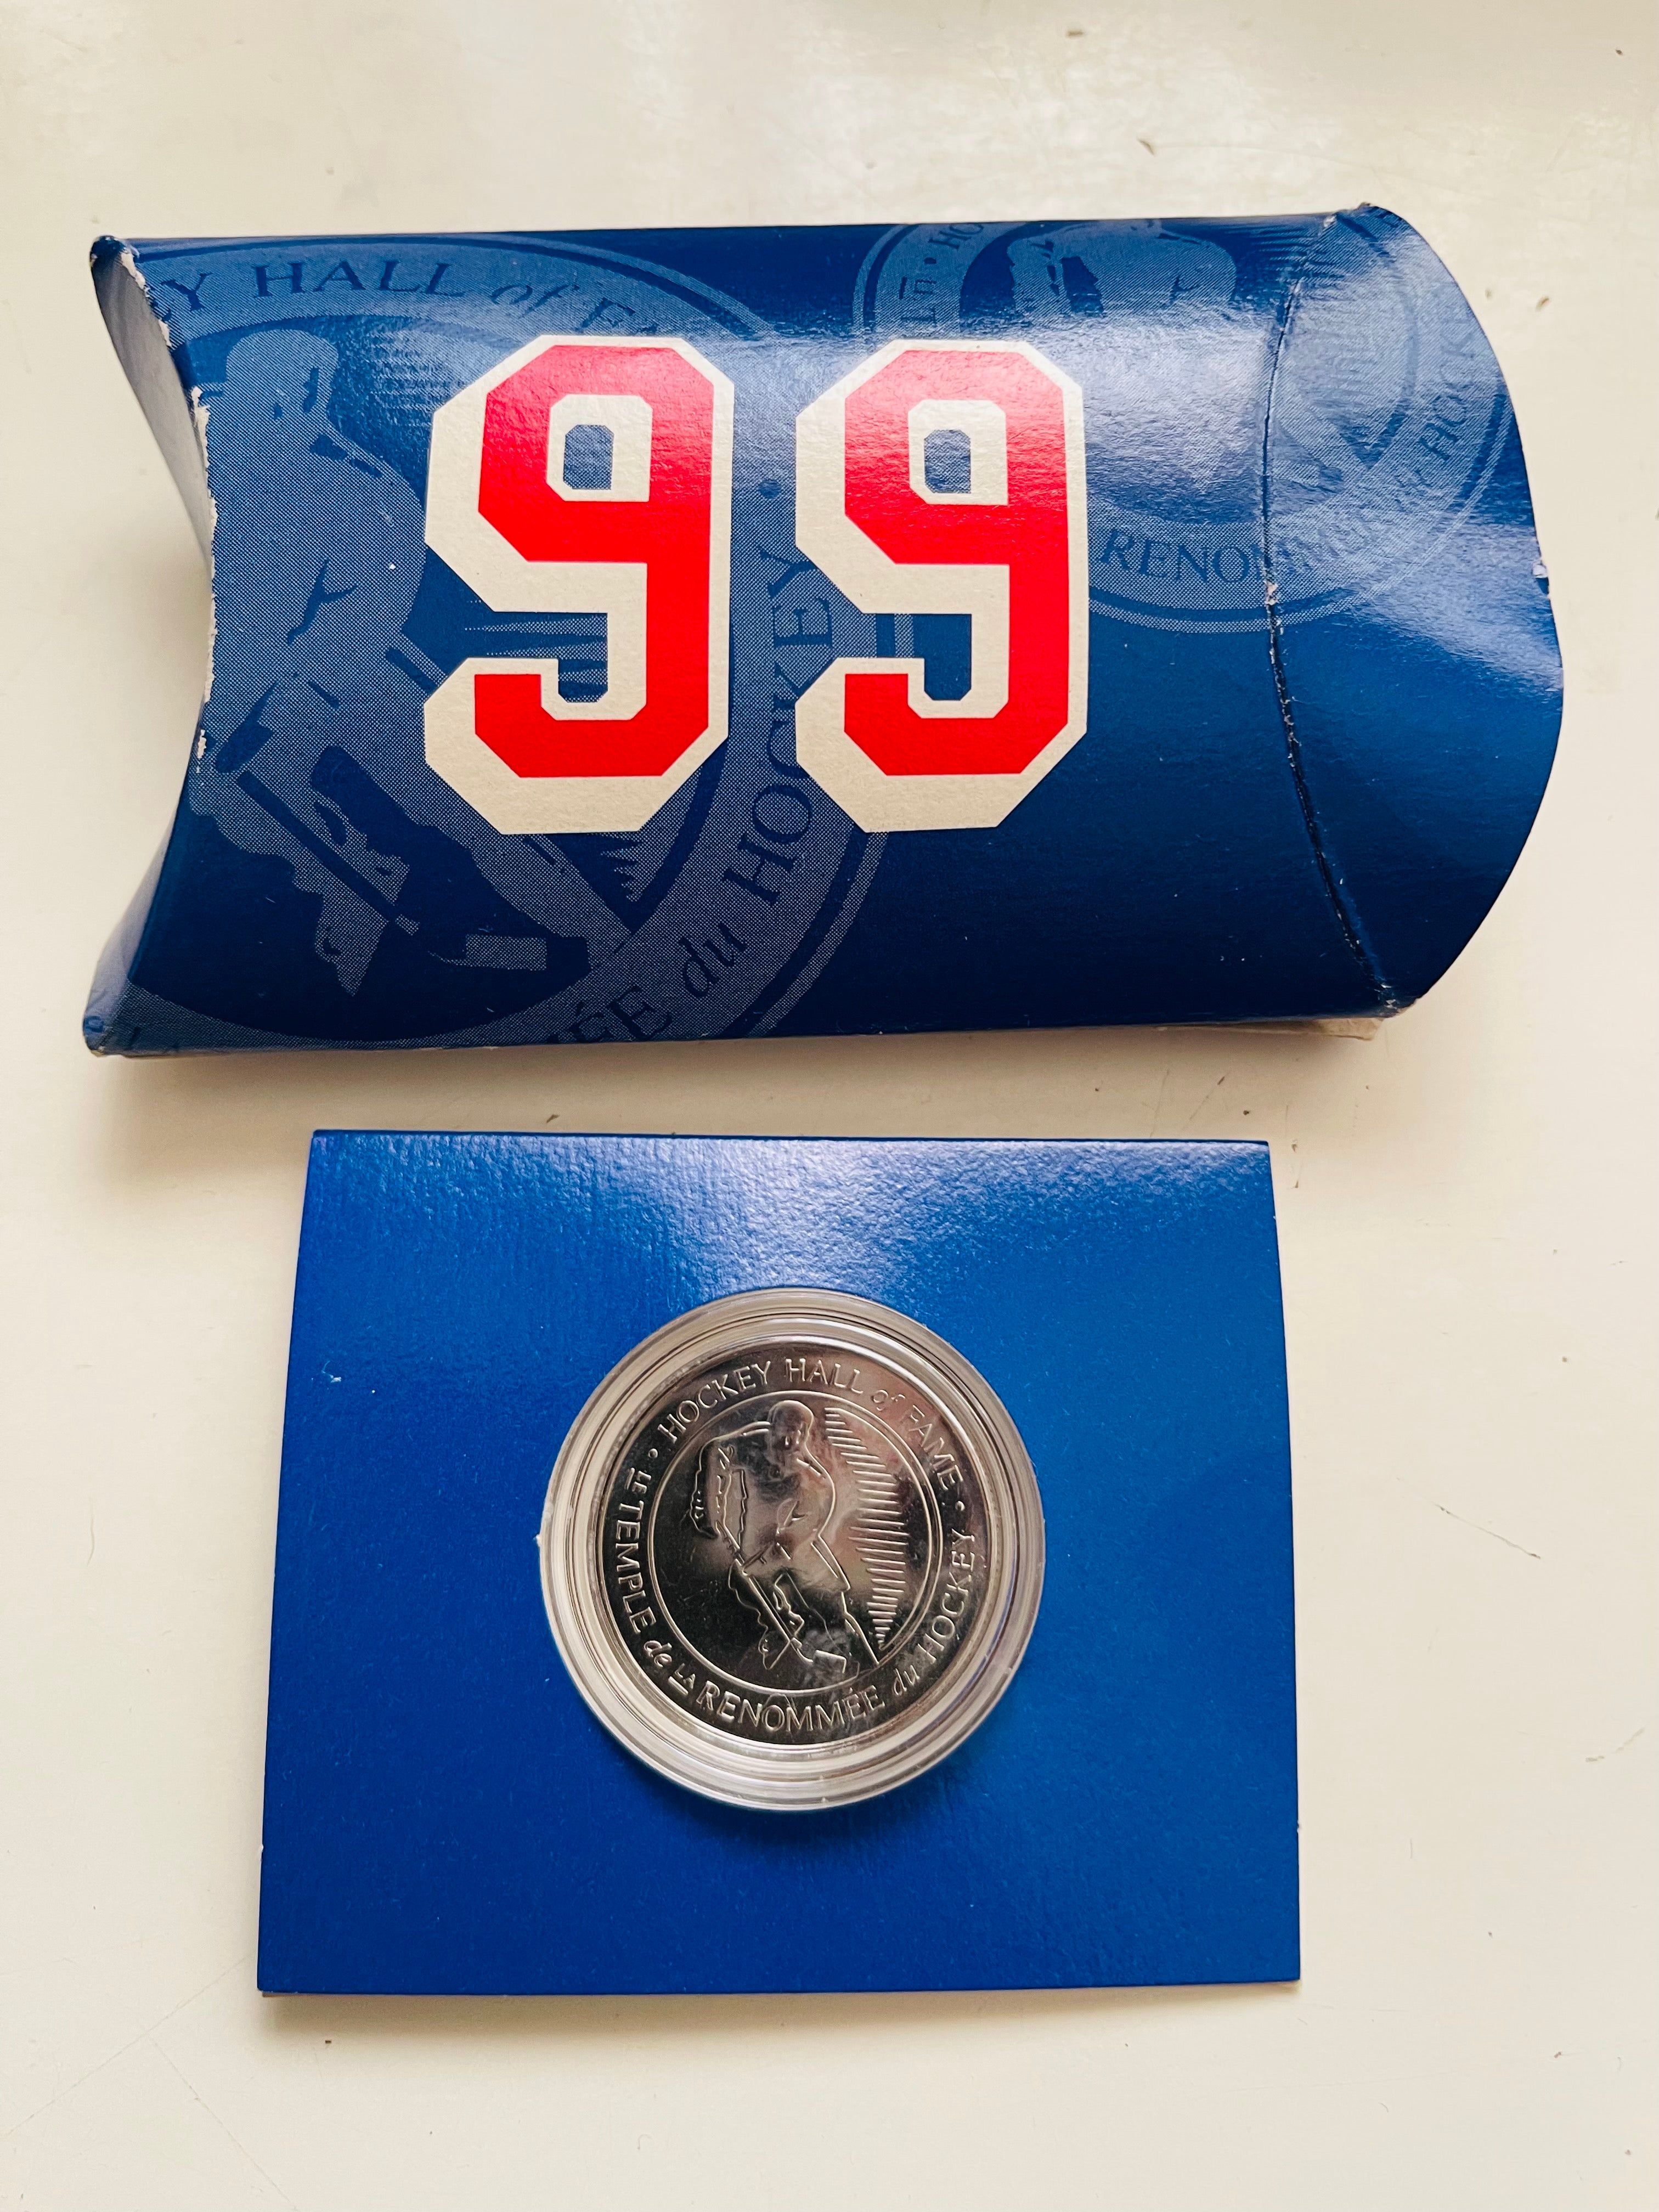 Wayne Gretzky limited issue silver hockey hall of fame coin